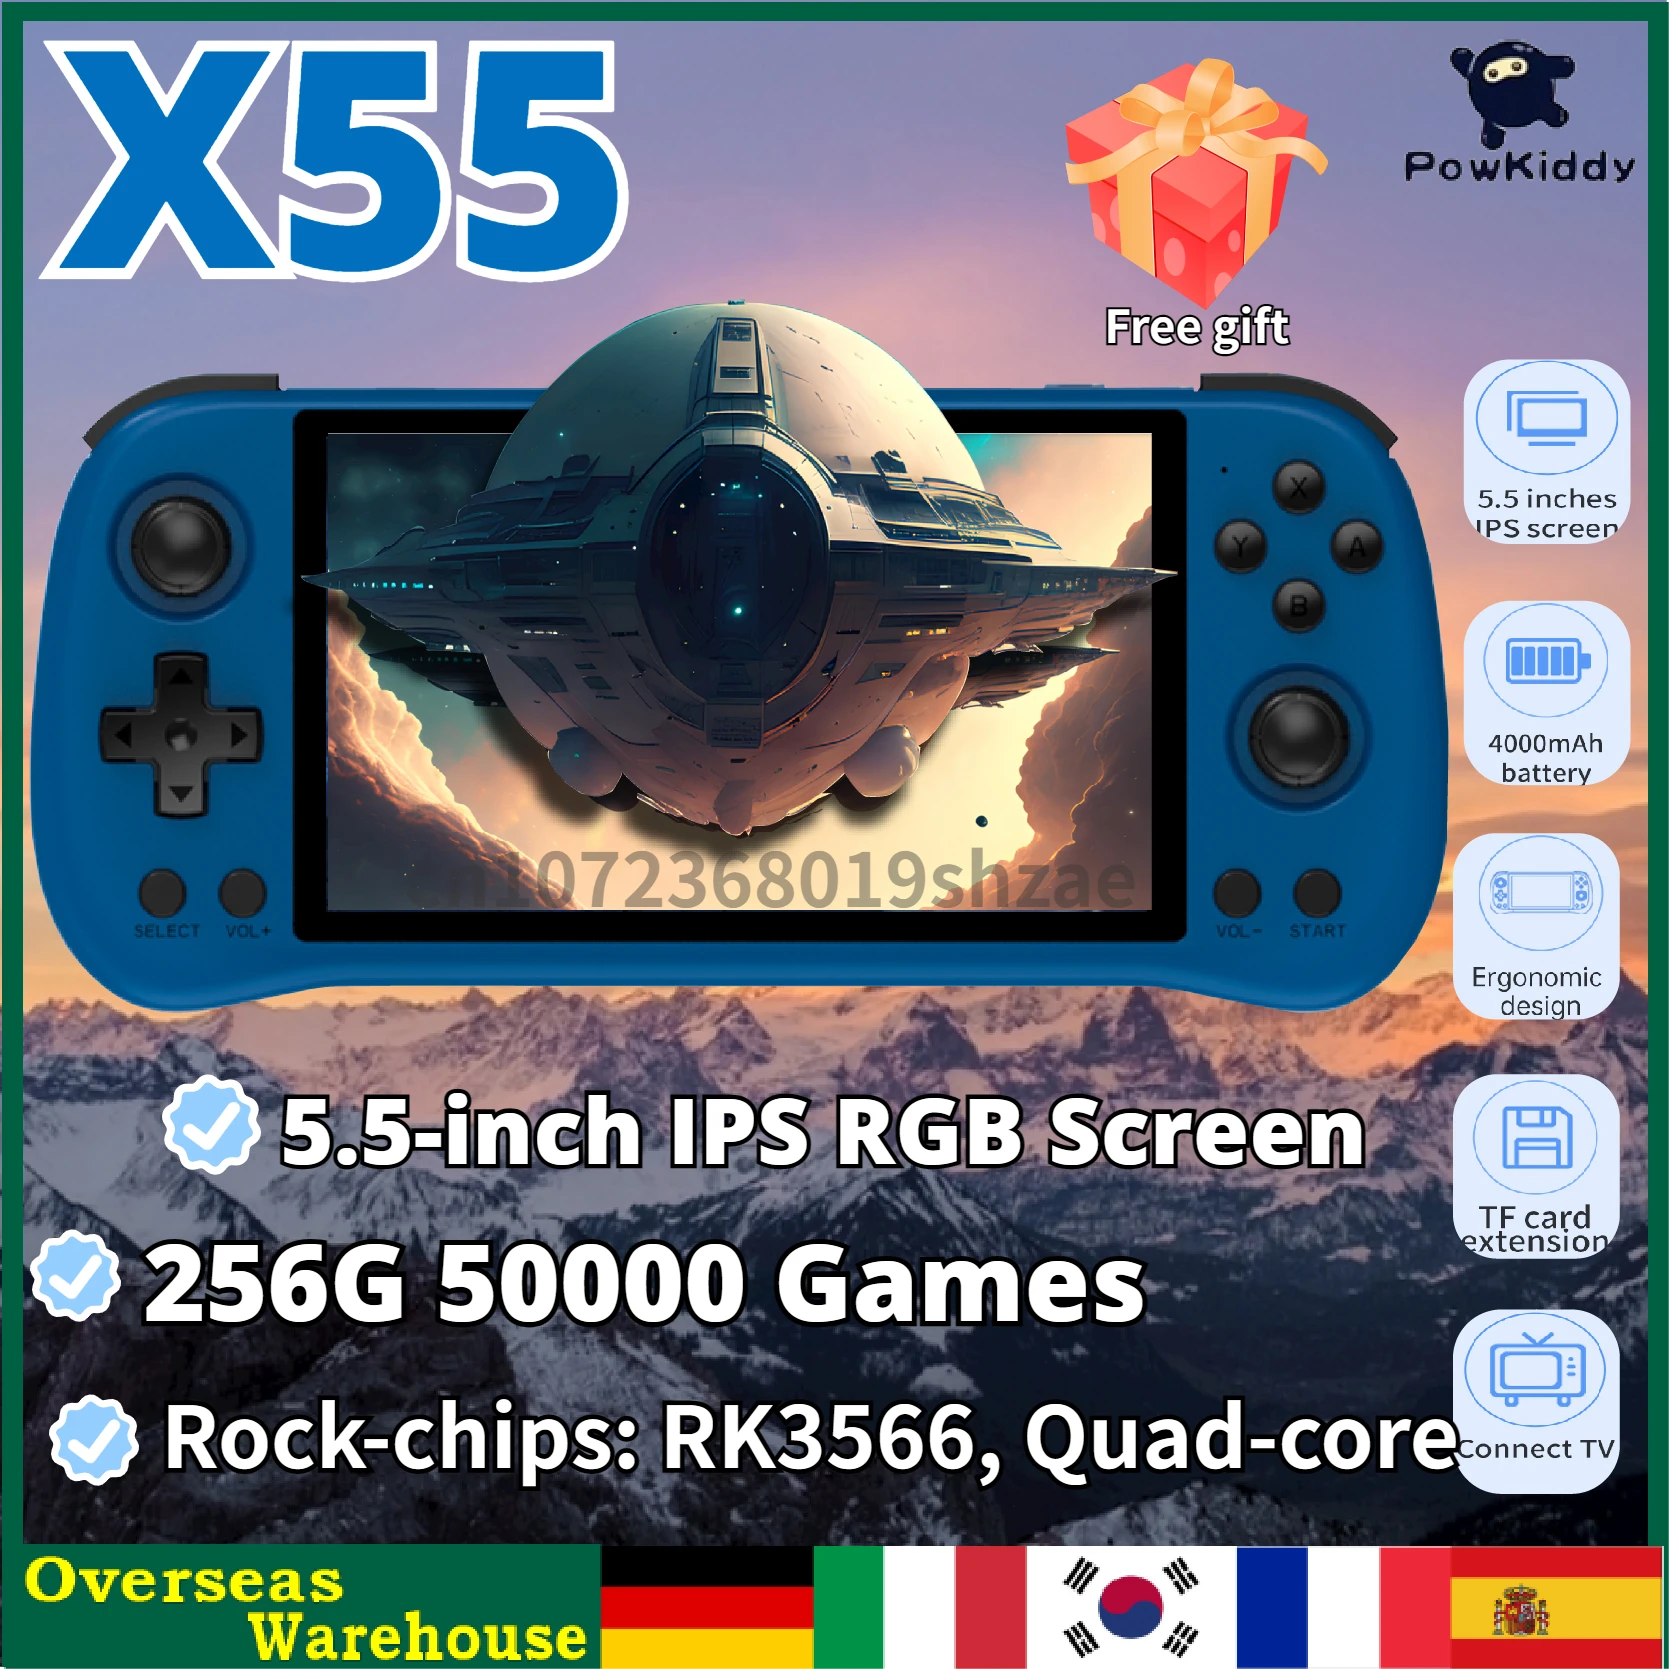 POWKIDDY X55  Retro Handheld Game Console Display 5.5 INCH HD IPS SCREEN Linux Open-Source Handheld Game Console WIFI Connection